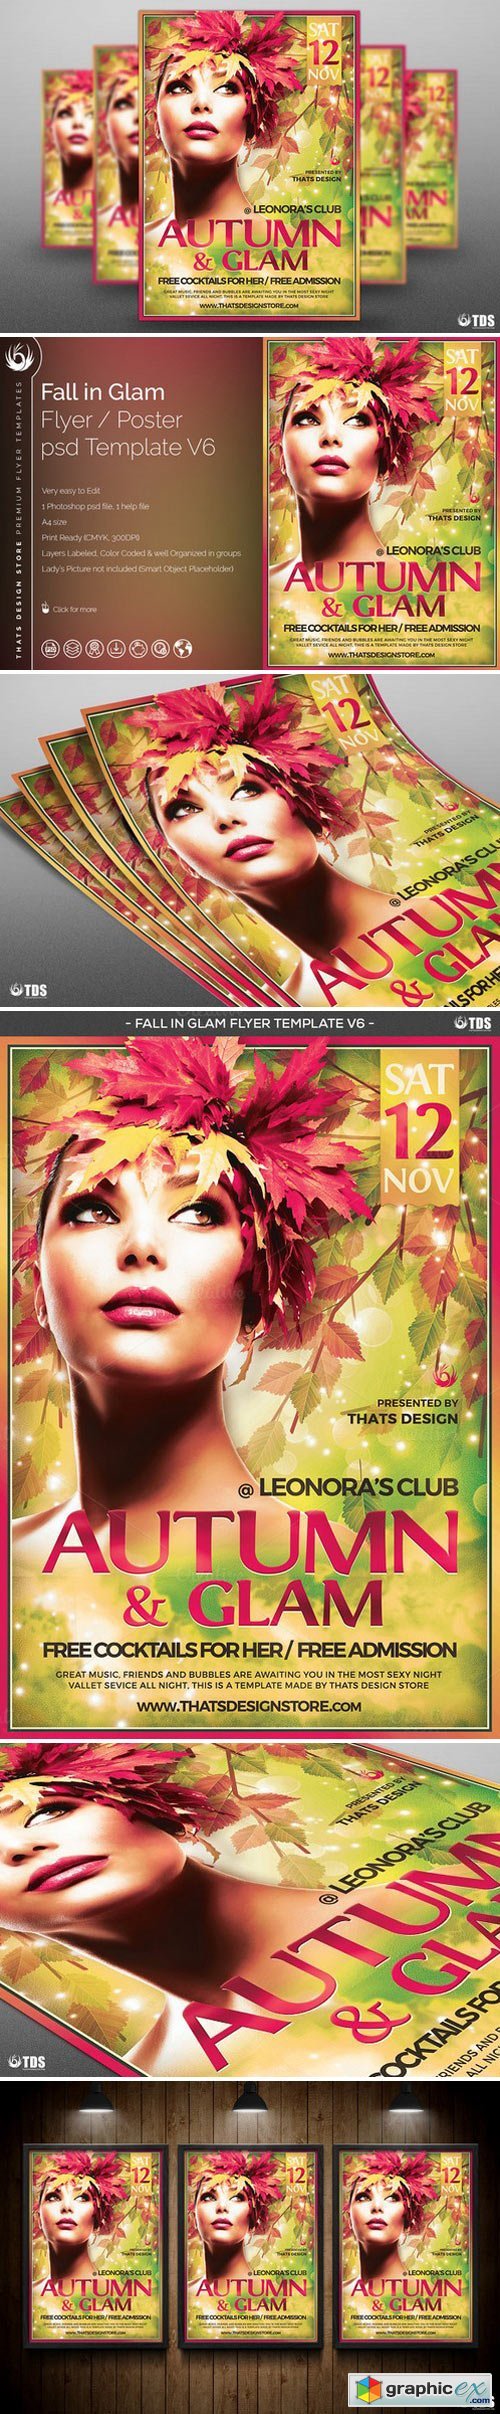 Fall in Glam Flyer Template V6